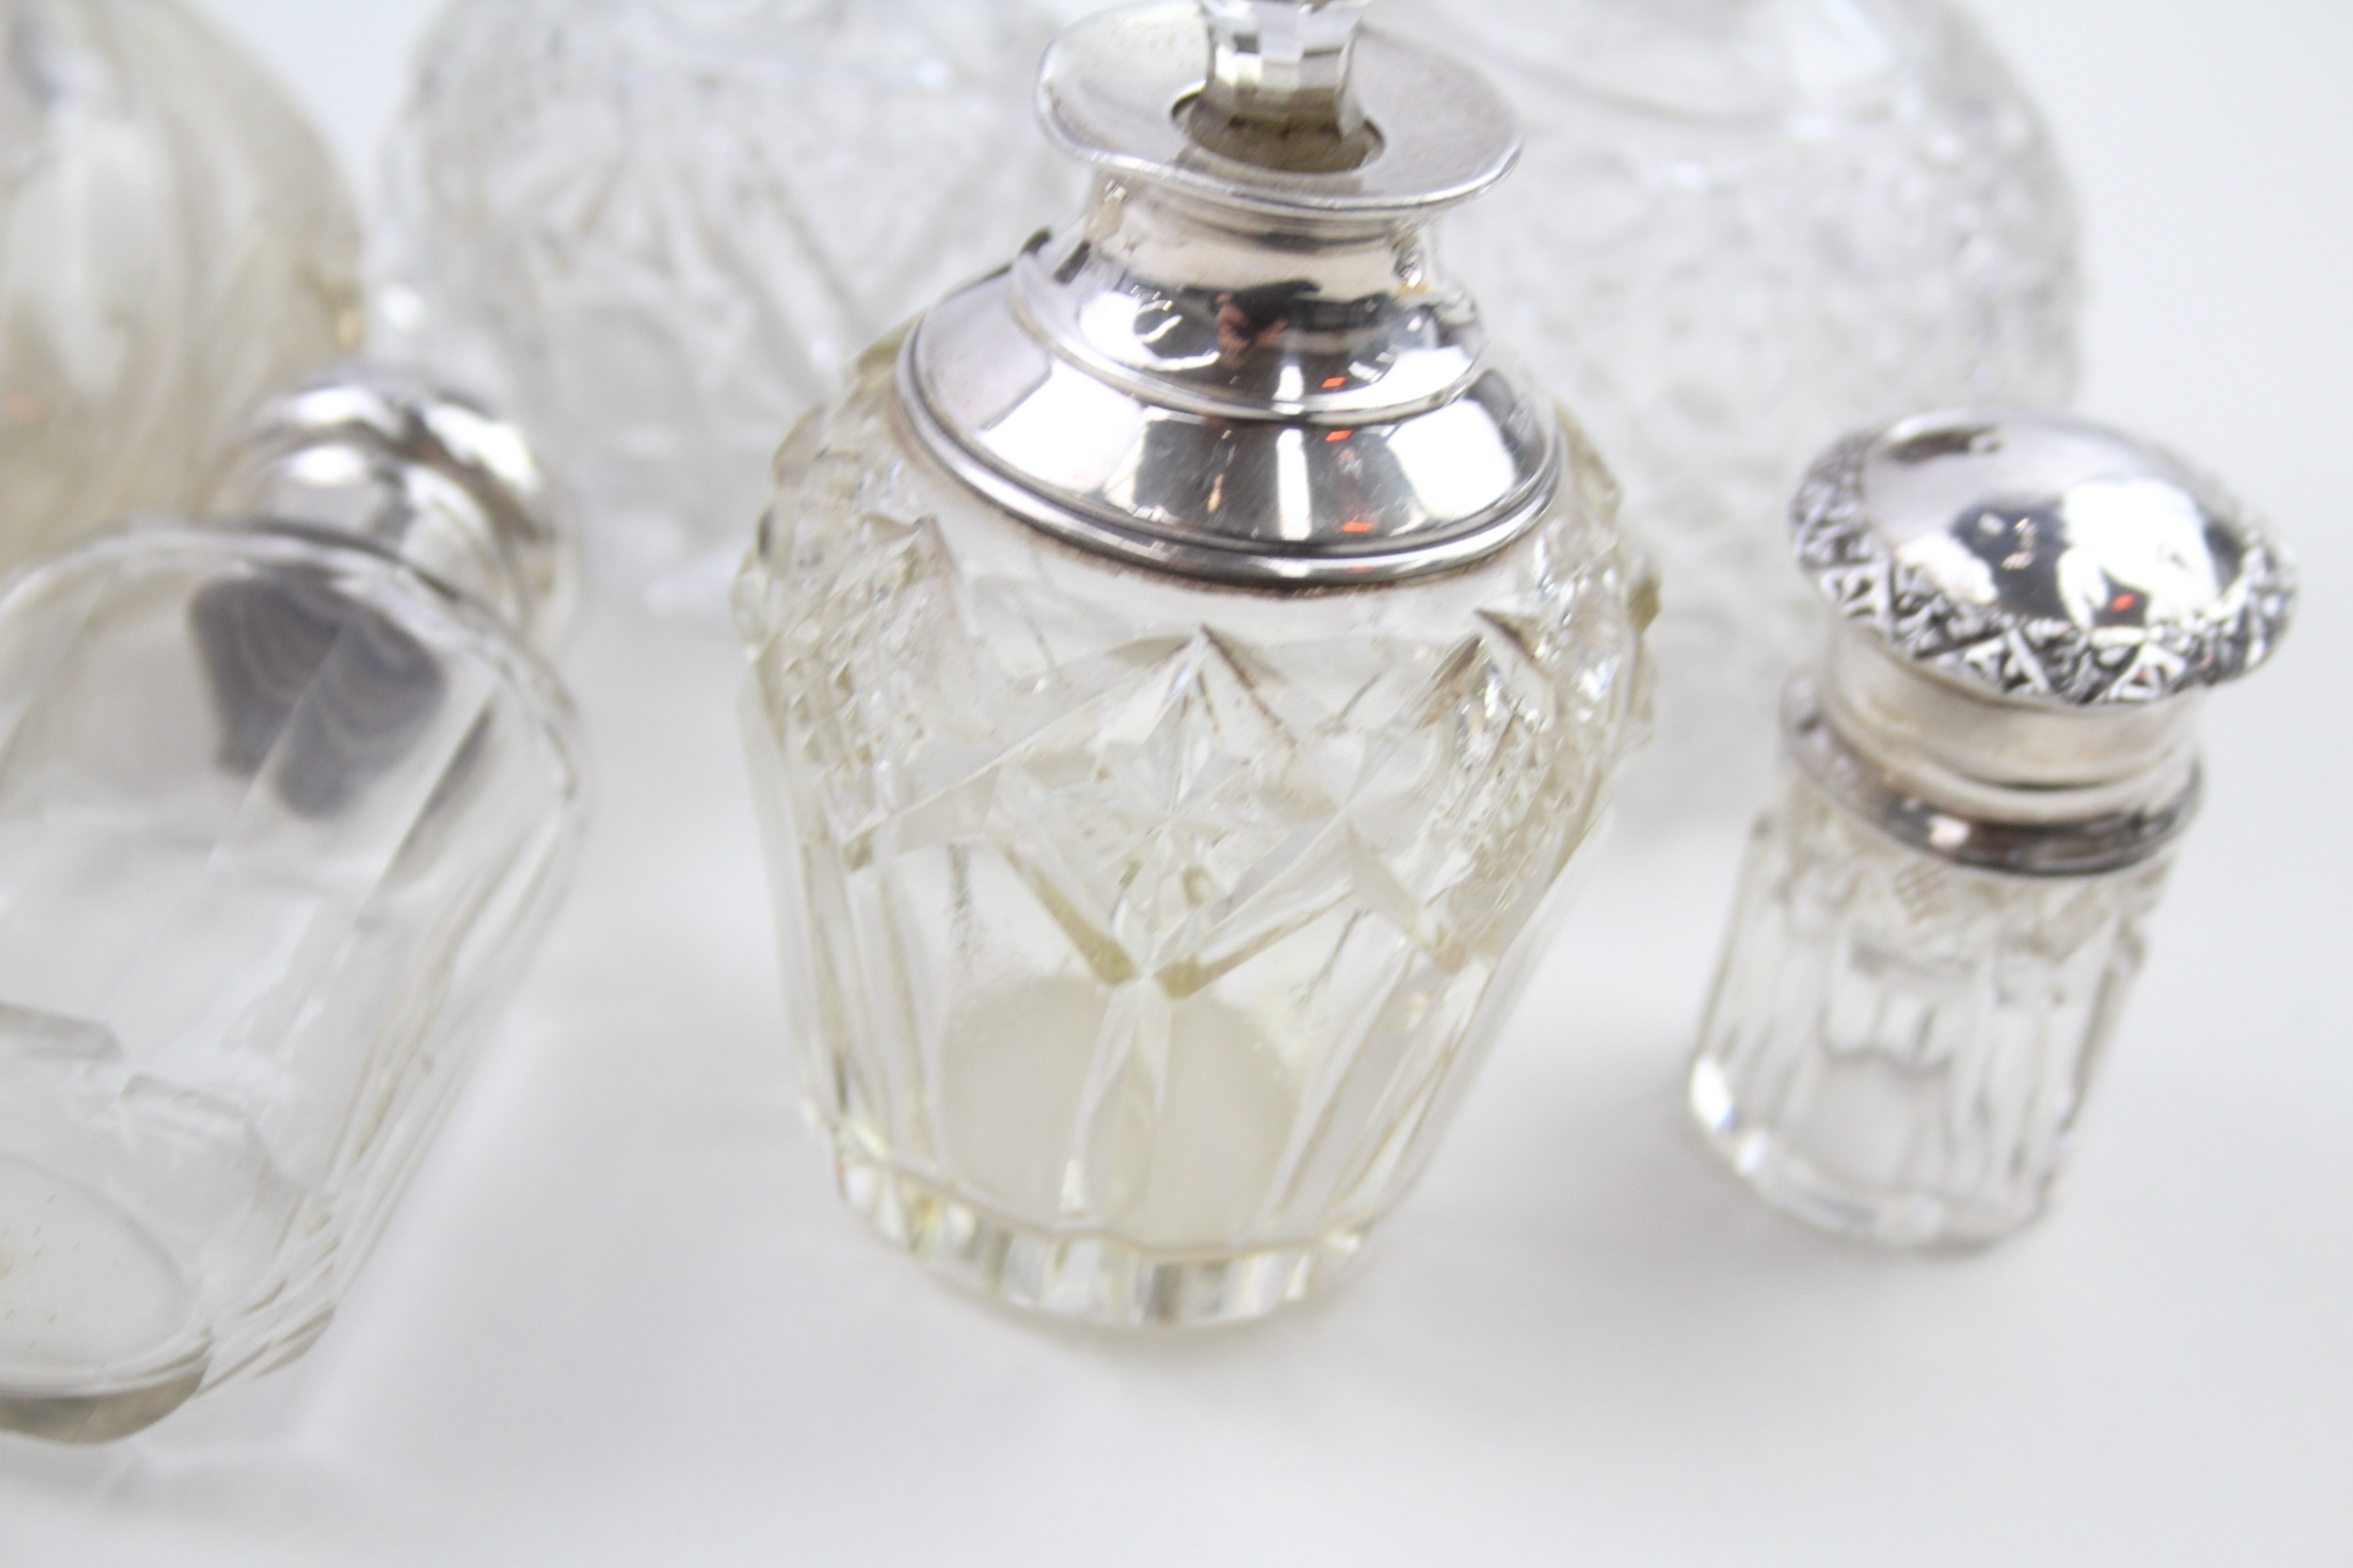 7 x .925 sterling banded / topped & cut glass ladies vanity scent bottles - Image 7 of 9